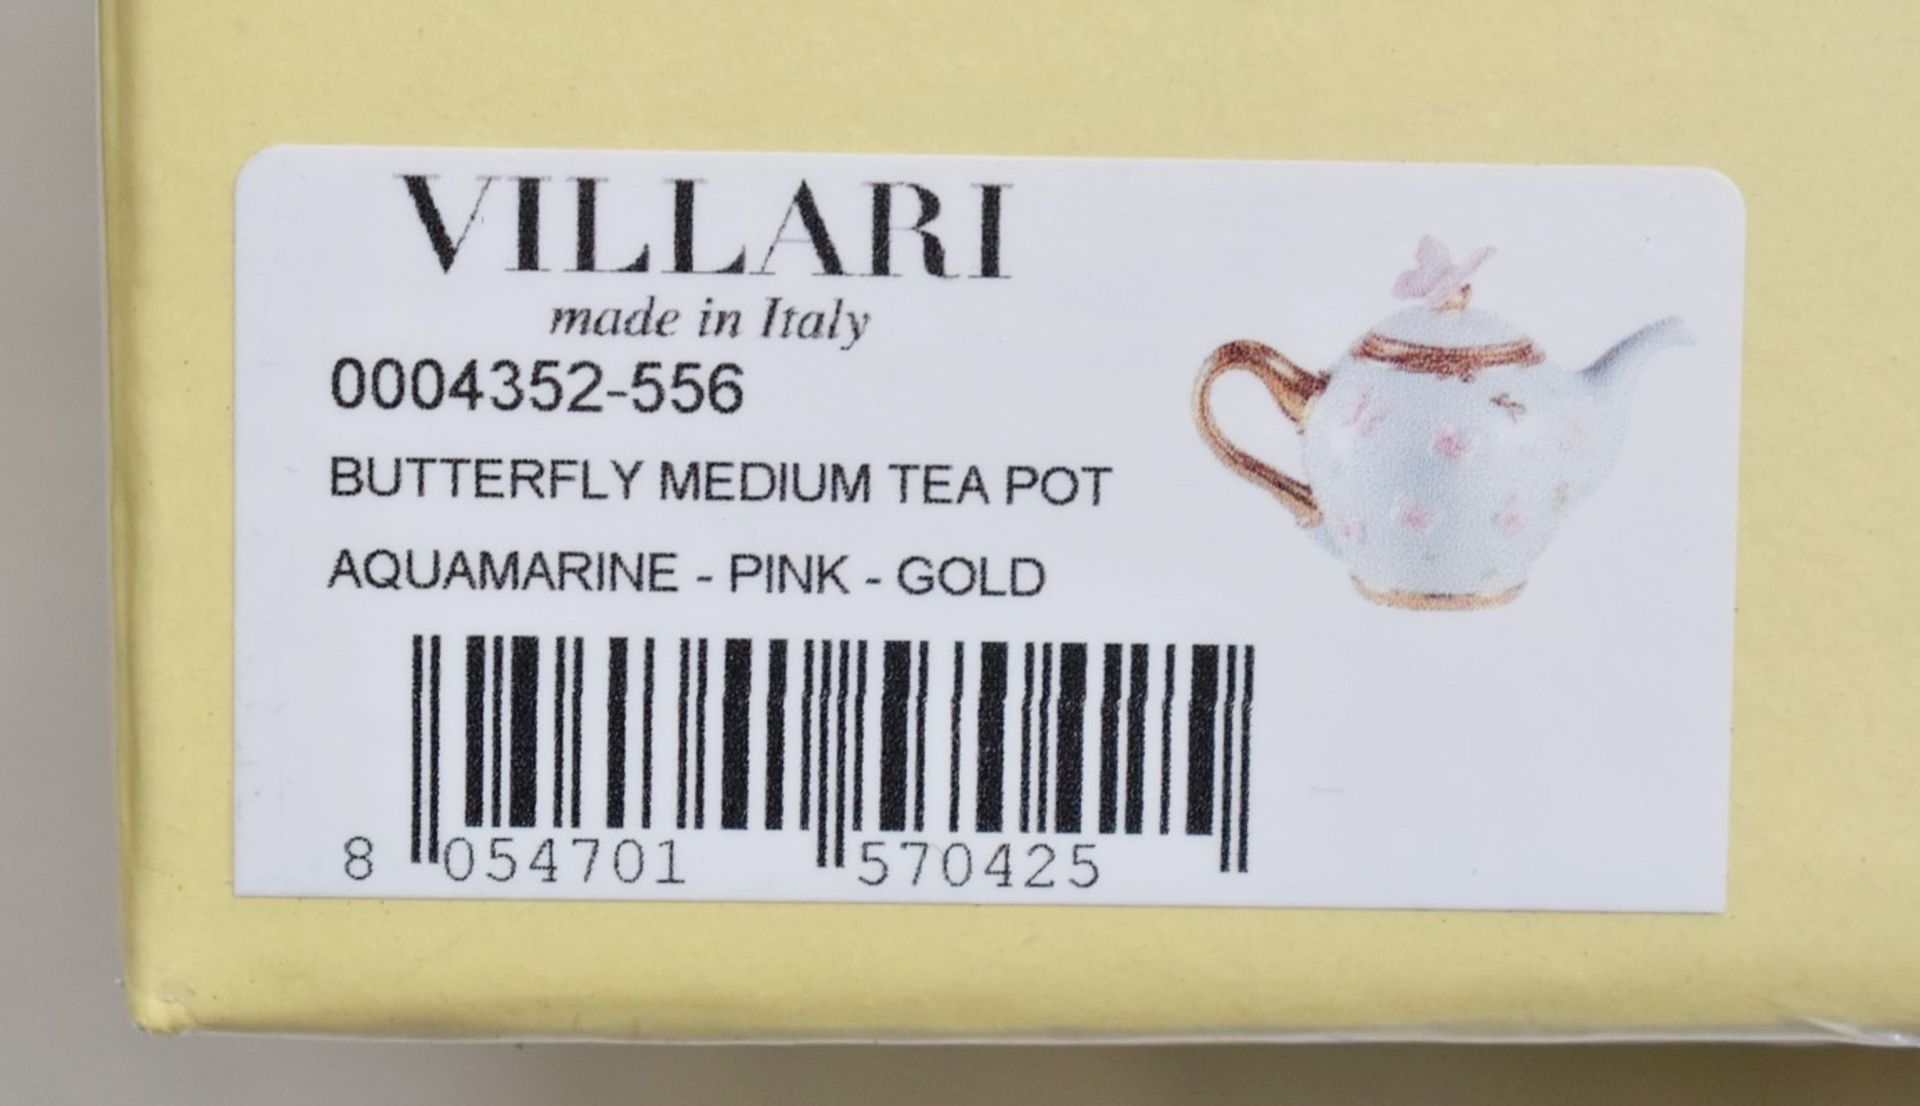 1 x VILLARI Hand-crafted Luxury Italian Porcelain Butterfly Tea Pot - Sealed/Boxed - RRP £365.00 - Image 4 of 4